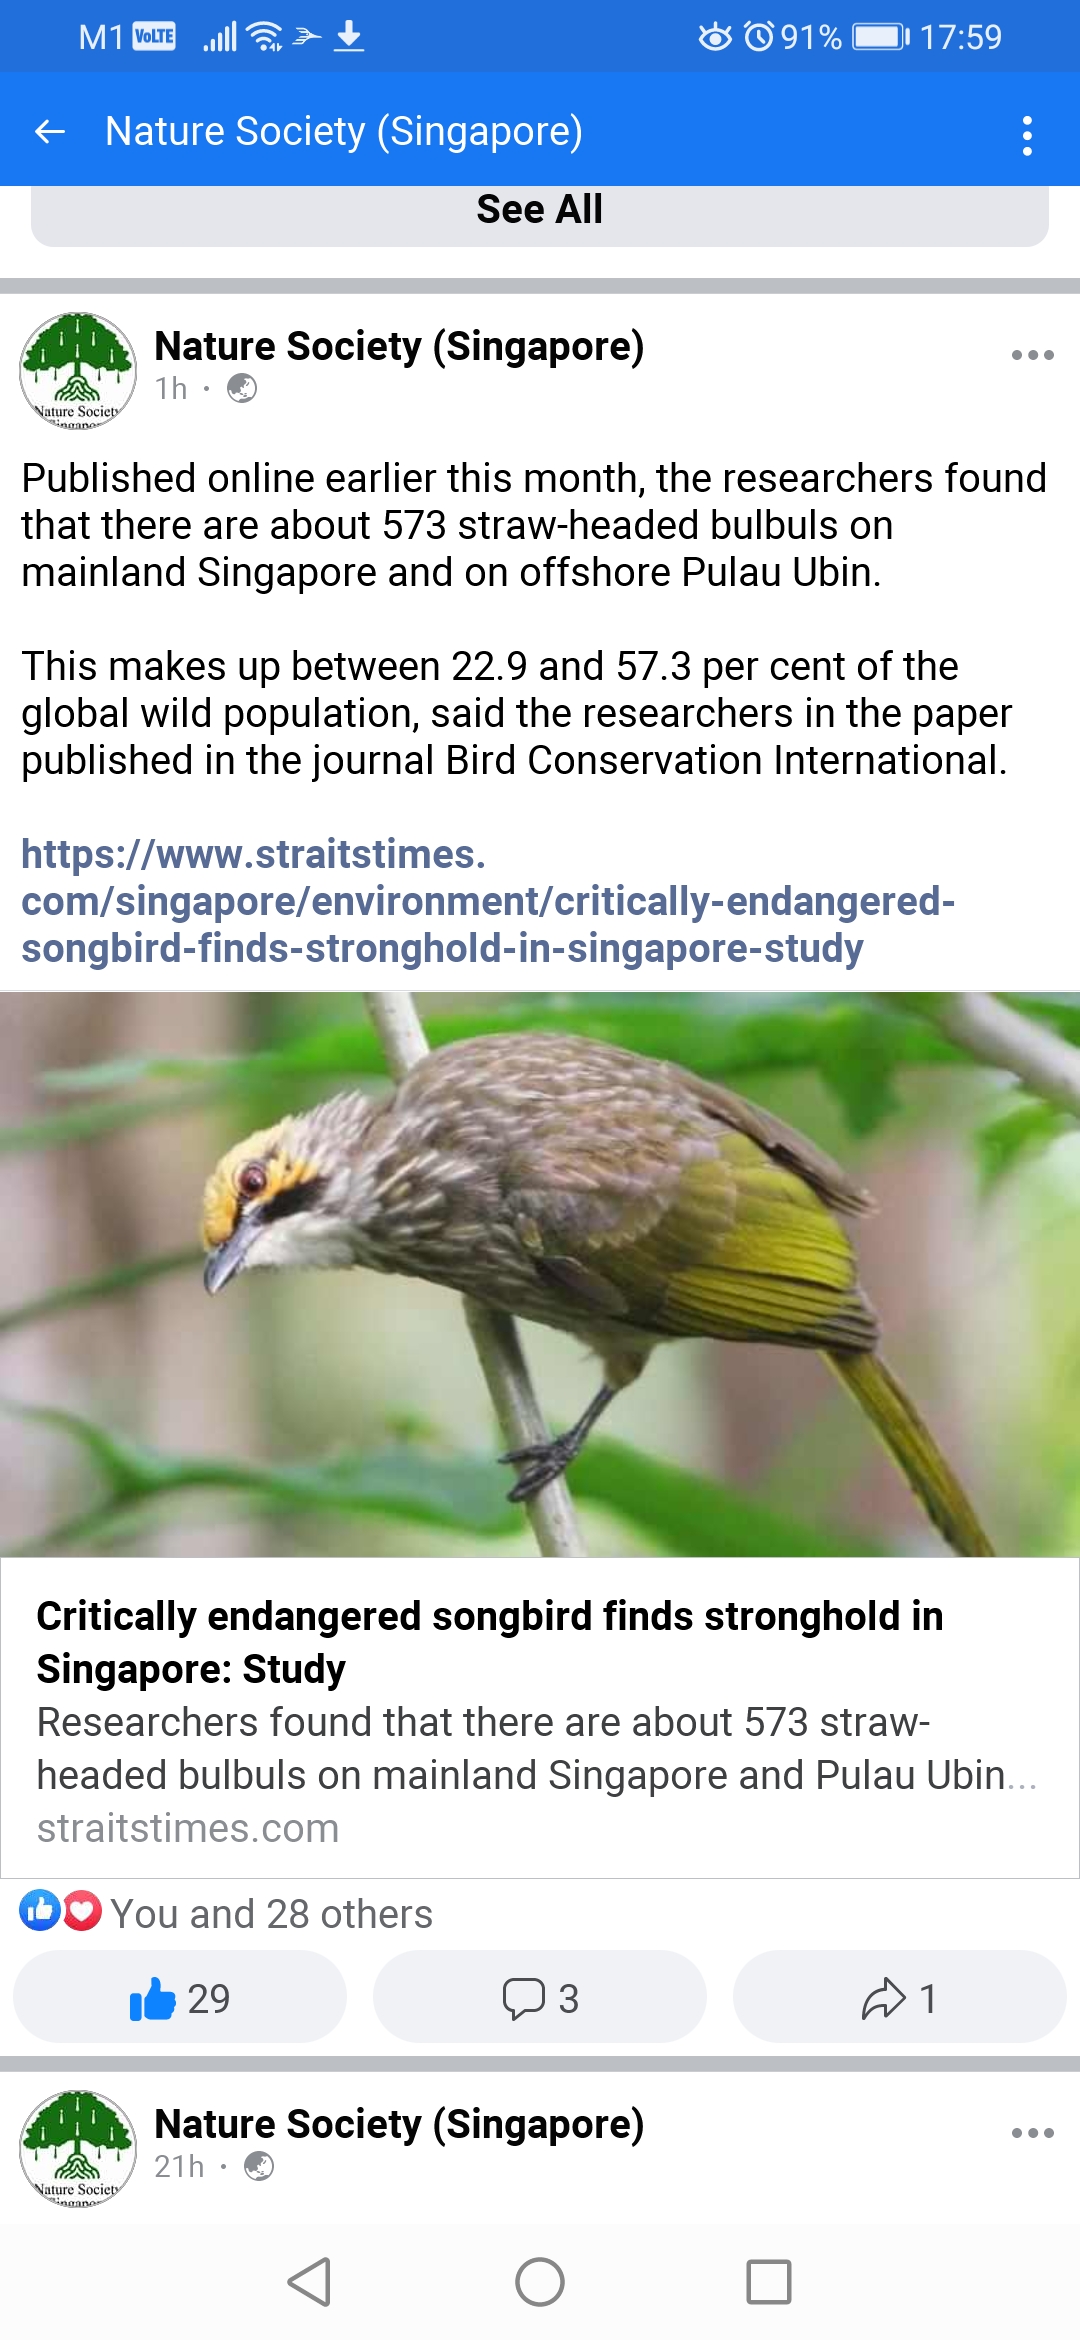 Help save our critically endangered straw-headed bulbuls and their natural habitats